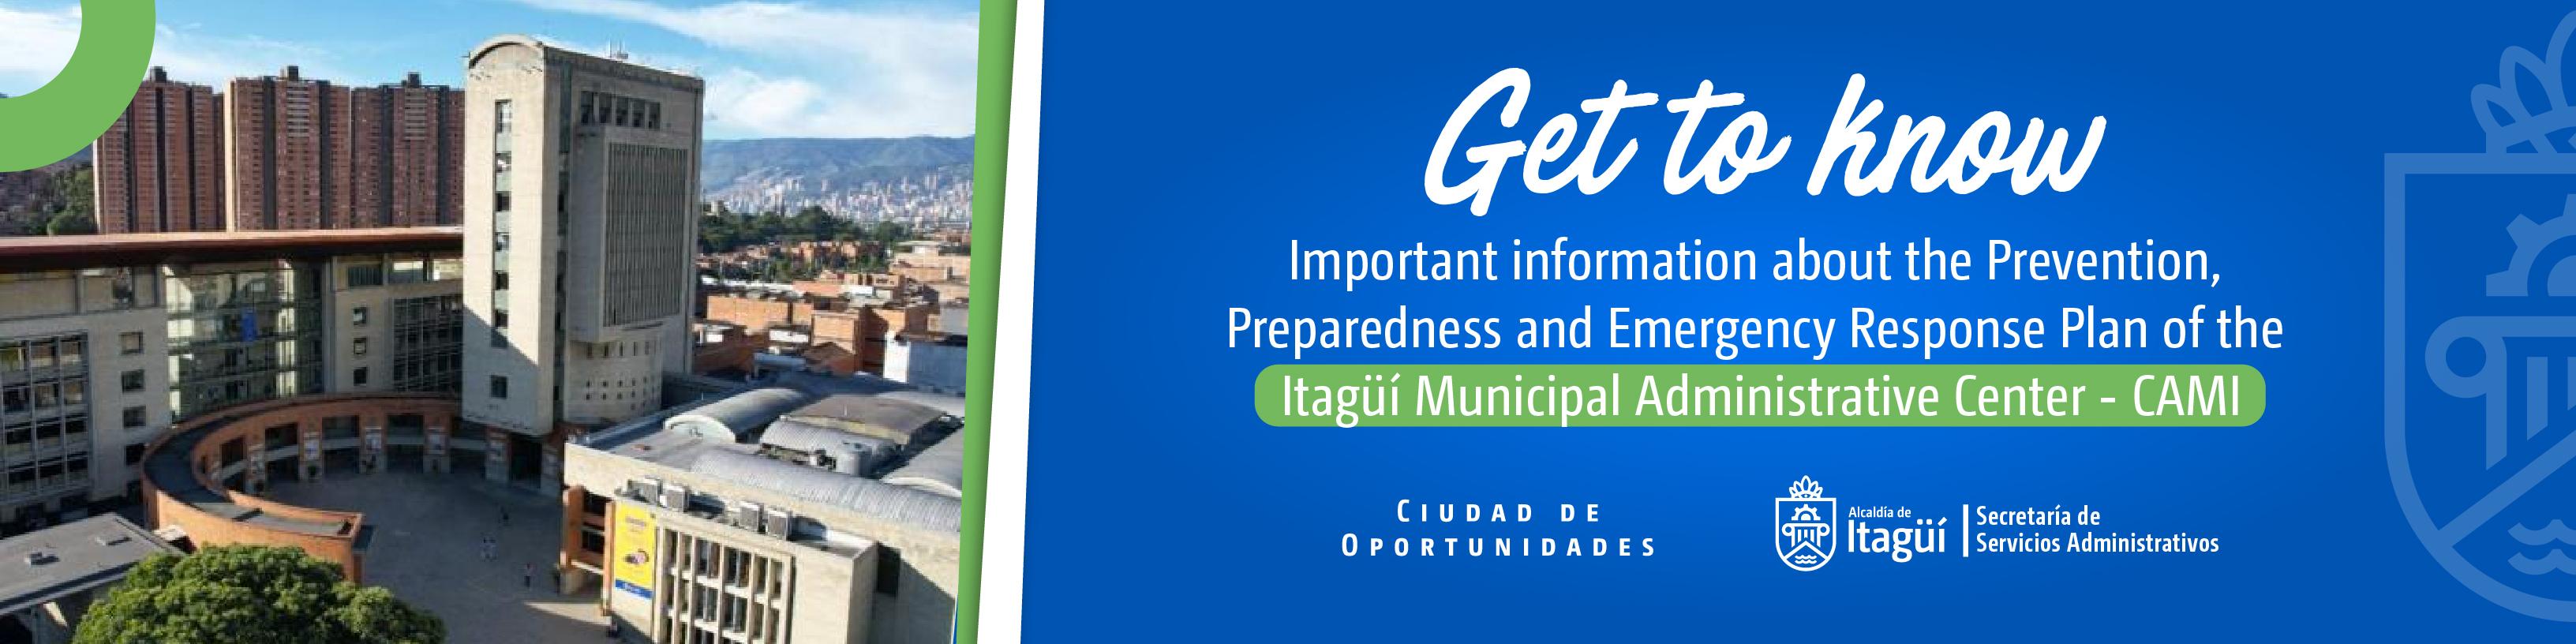 Get to know important information about the prevention and emergency response plan of the Itagüí Municipal Administrative Center - CAMI